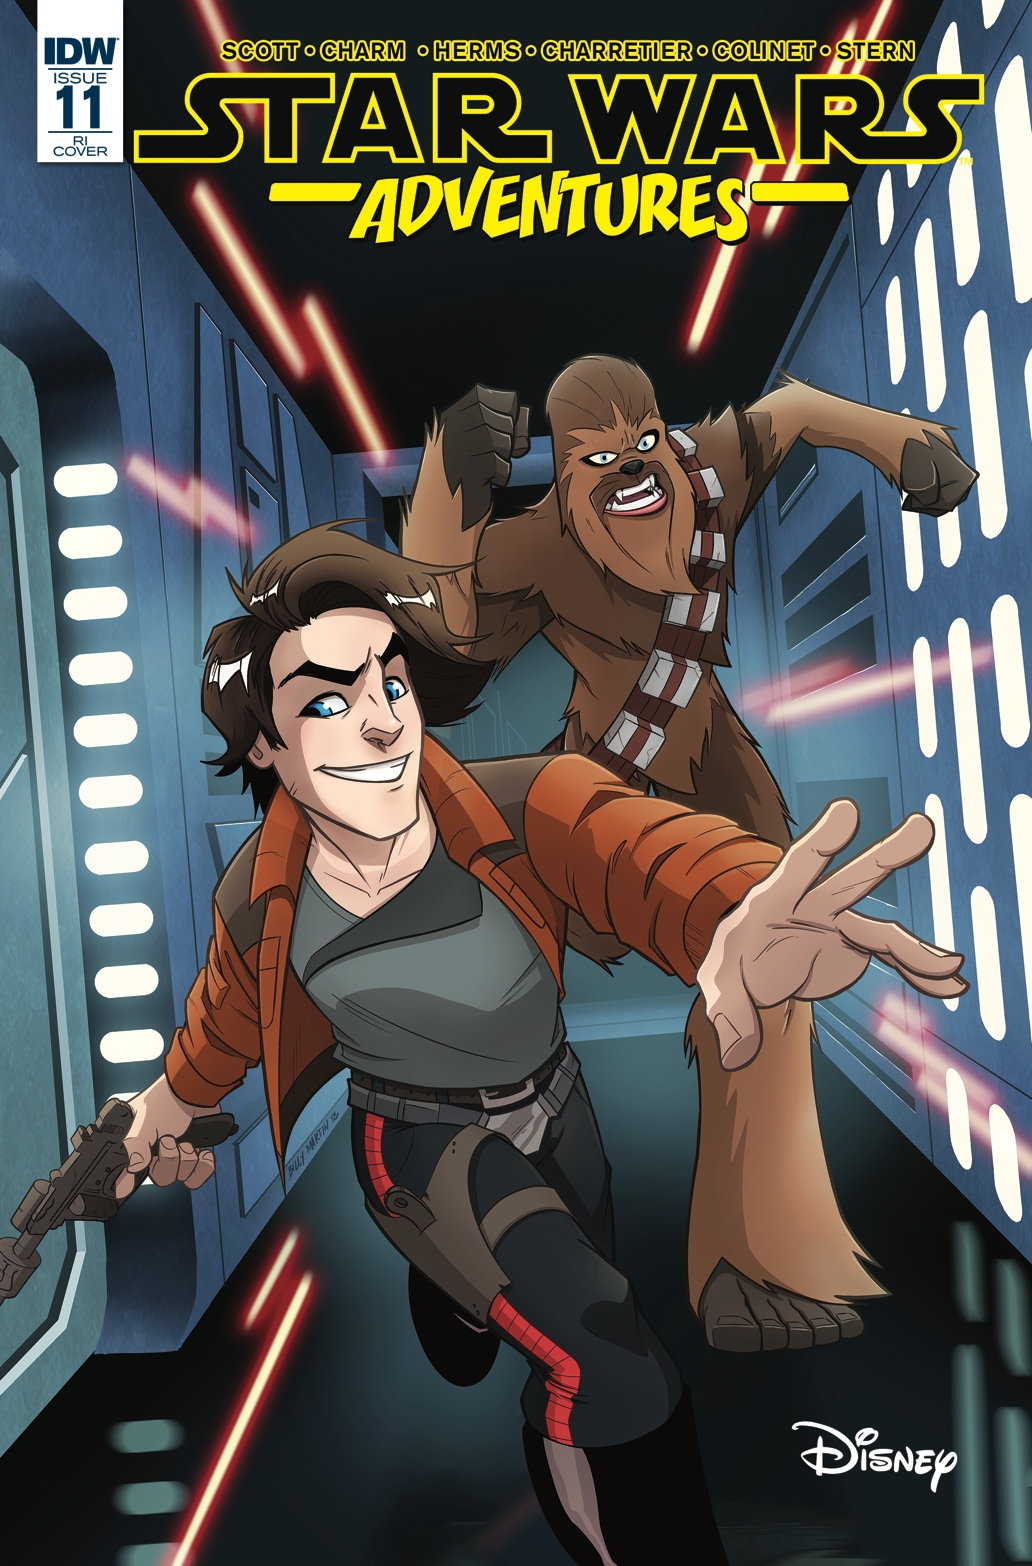 Star Wars Adventures #11 (Billy Martin Variant Cover) (06.06.2018)